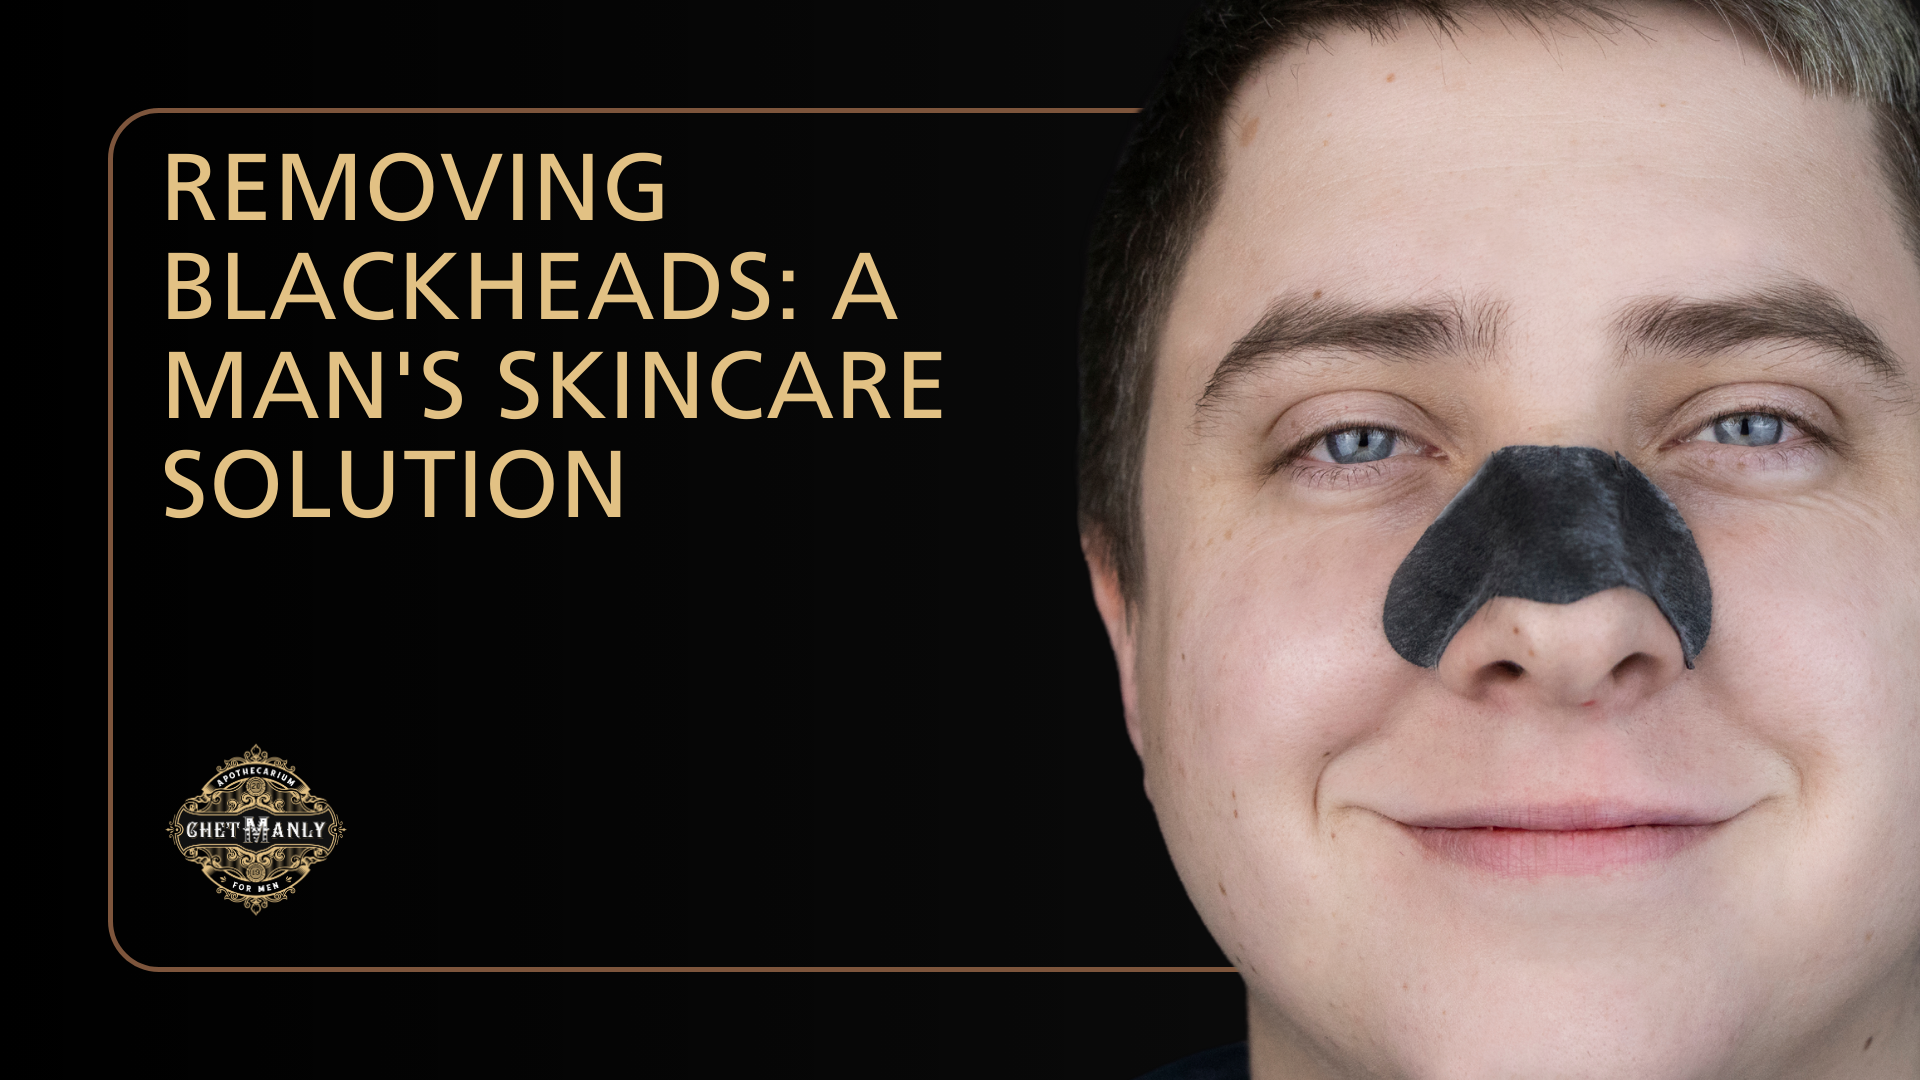 Removing Blackheads: A Man's Skincare Solution